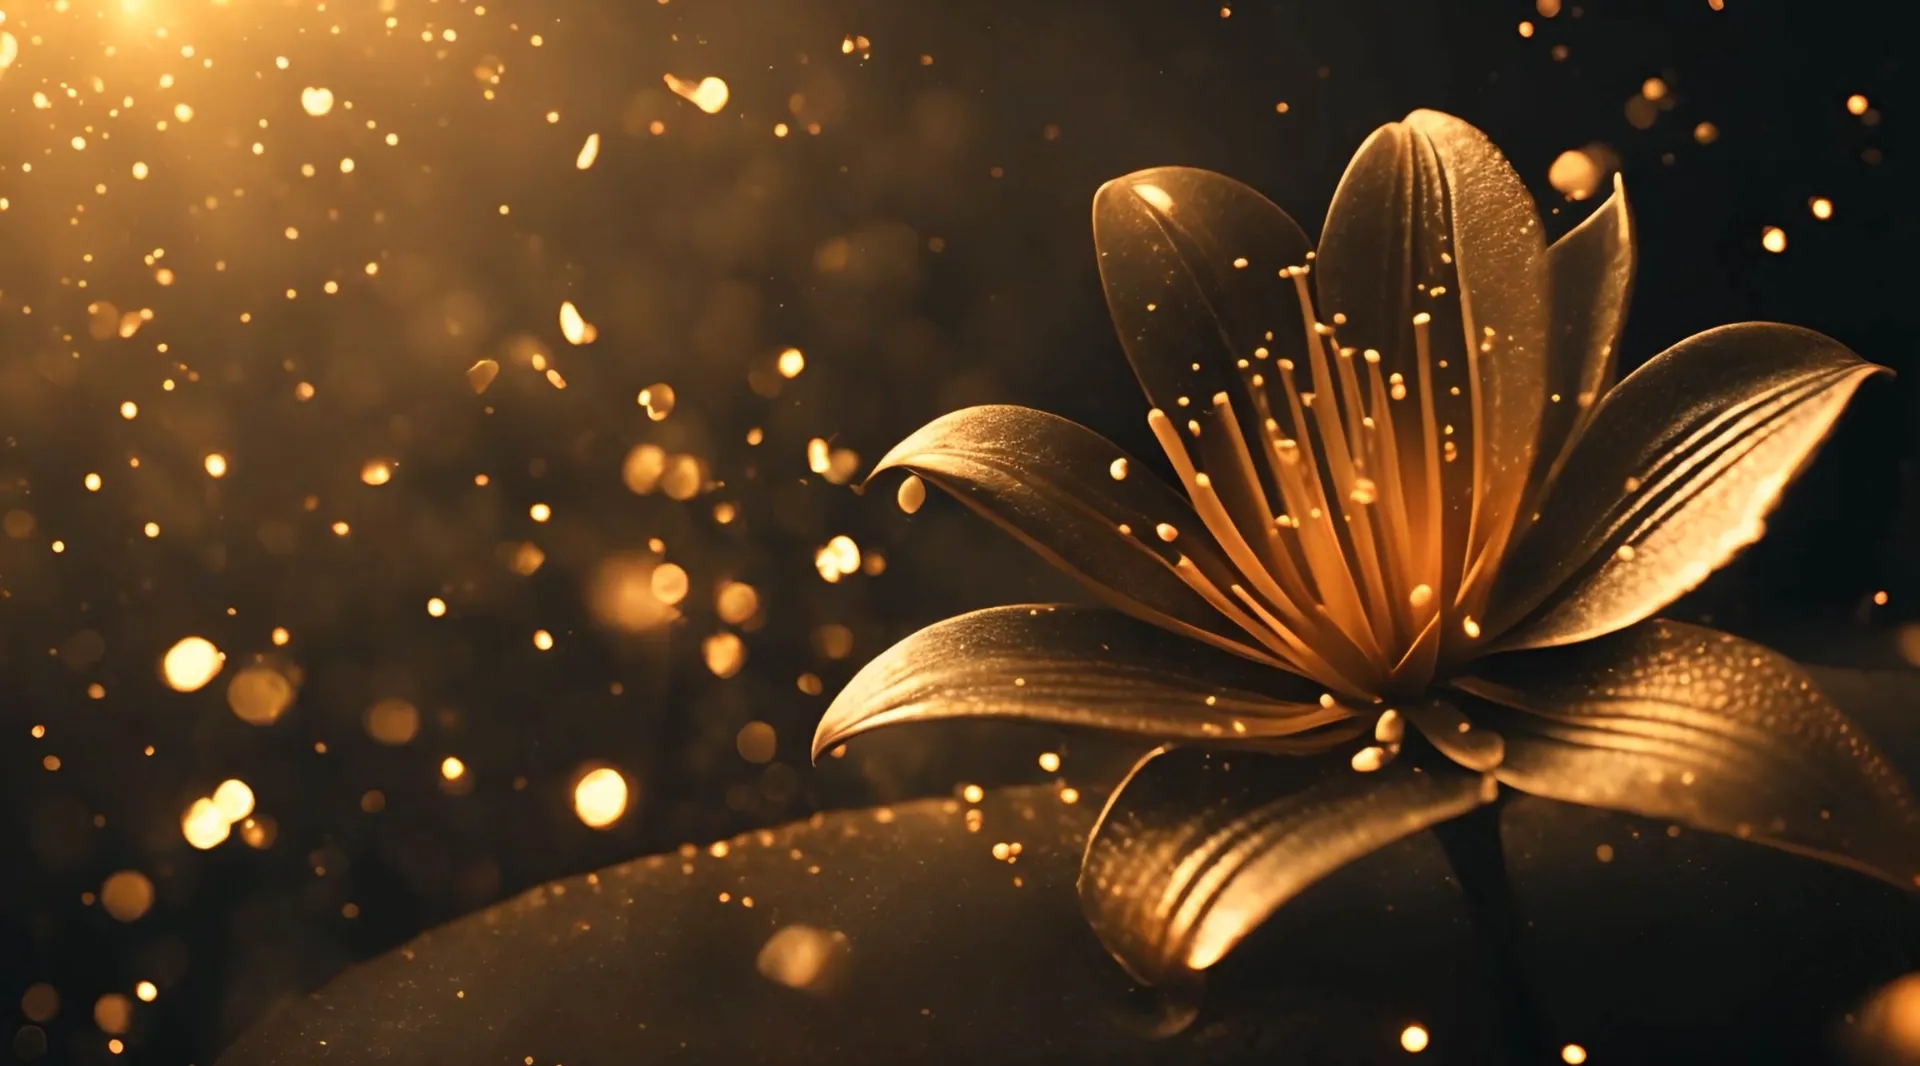 Majestic Golden Flower with Sparkling Effects Animation